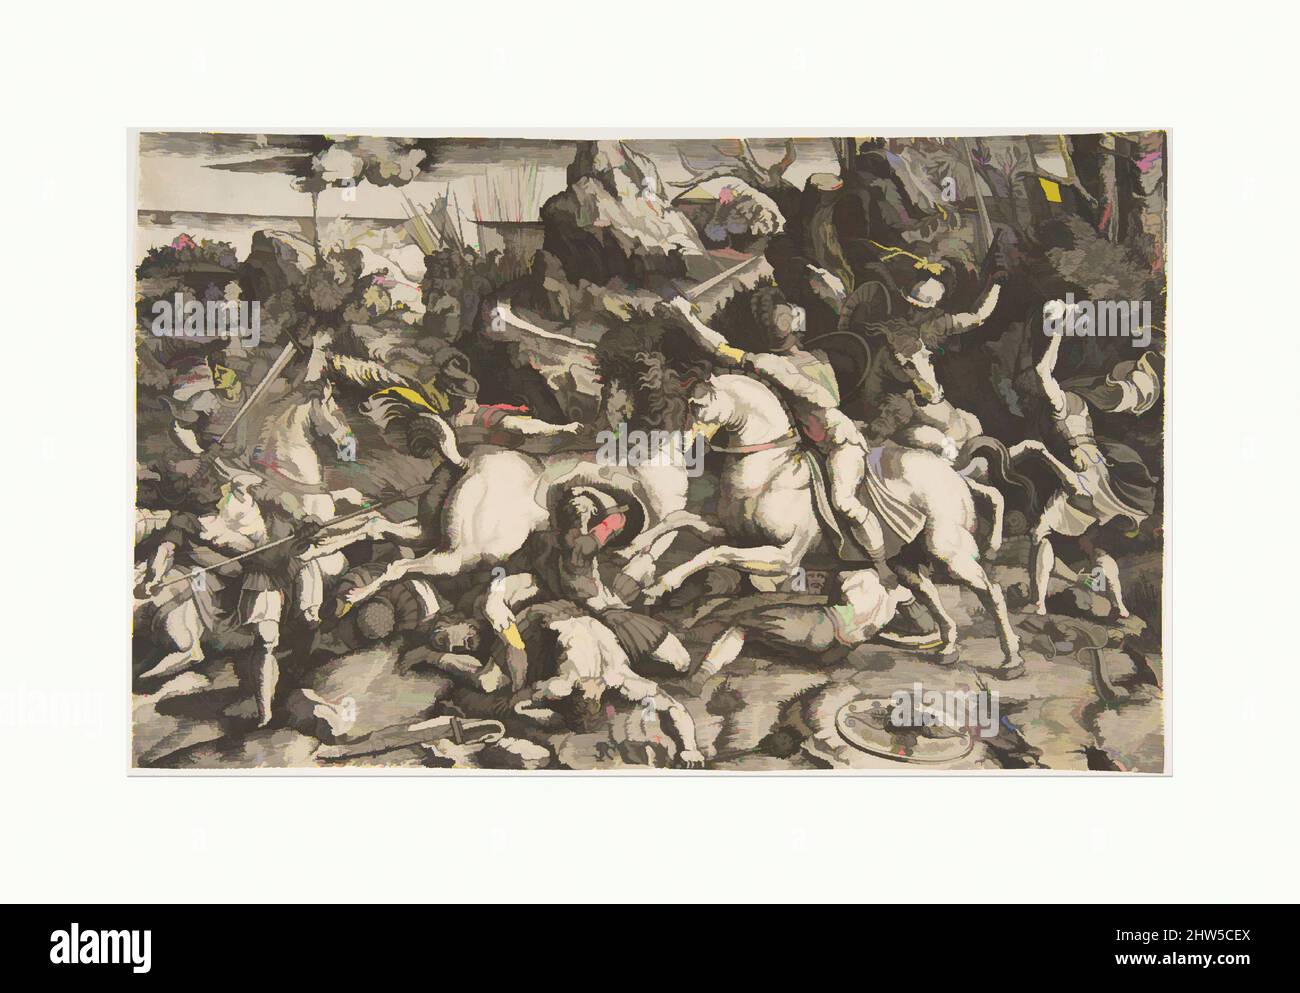 Art inspired by Battle scene in a landscape with soldiers on horseback and several fallen men, another group of riders in the background, ca. 1520, Engraving, Sheet (Trimmed): 8 7/8 × 14 1/4 in. (22.5 × 36.2 cm), Prints, Marco Dente (Italian, Ravenna, active by 1515–died 1527 Rome, Classic works modernized by Artotop with a splash of modernity. Shapes, color and value, eye-catching visual impact on art. Emotions through freedom of artworks in a contemporary way. A timeless message pursuing a wildly creative new direction. Artists turning to the digital medium and creating the Artotop NFT Stock Photo